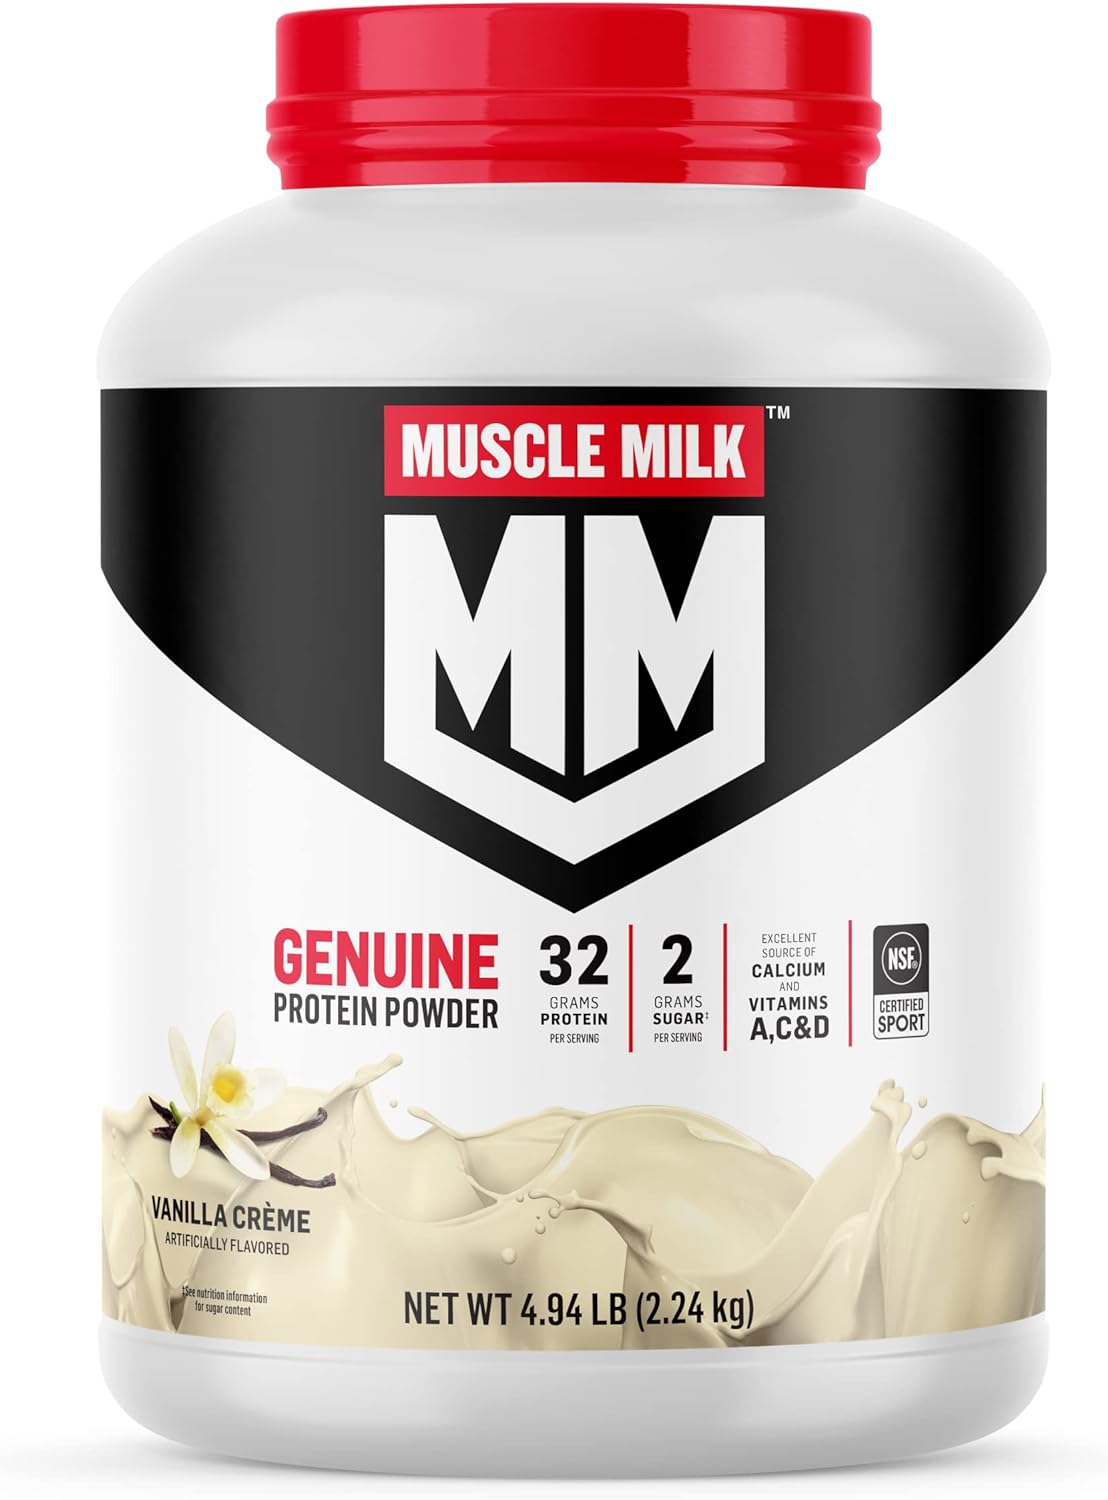 Muscle Milk Genuine Protein Powder, chocolate,  4.94 Pound, 32 Servings, 32g Protein 35% off S&S on Amazon $34.67